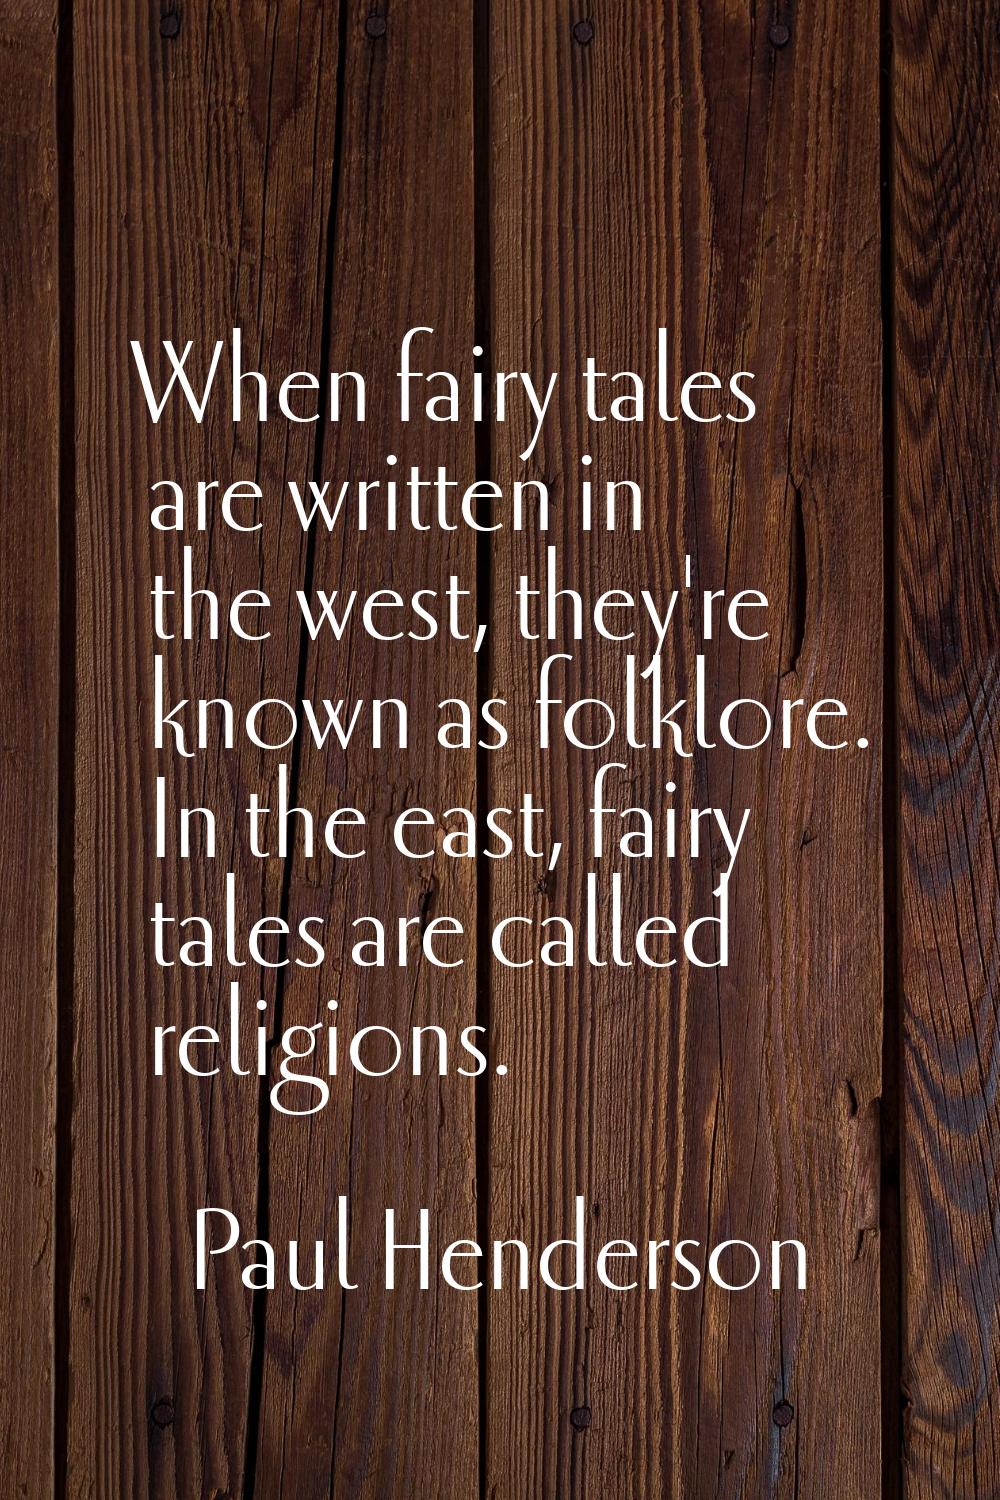 When fairy tales are written in the west, they're known as folklore. In the east, fairy tales are c